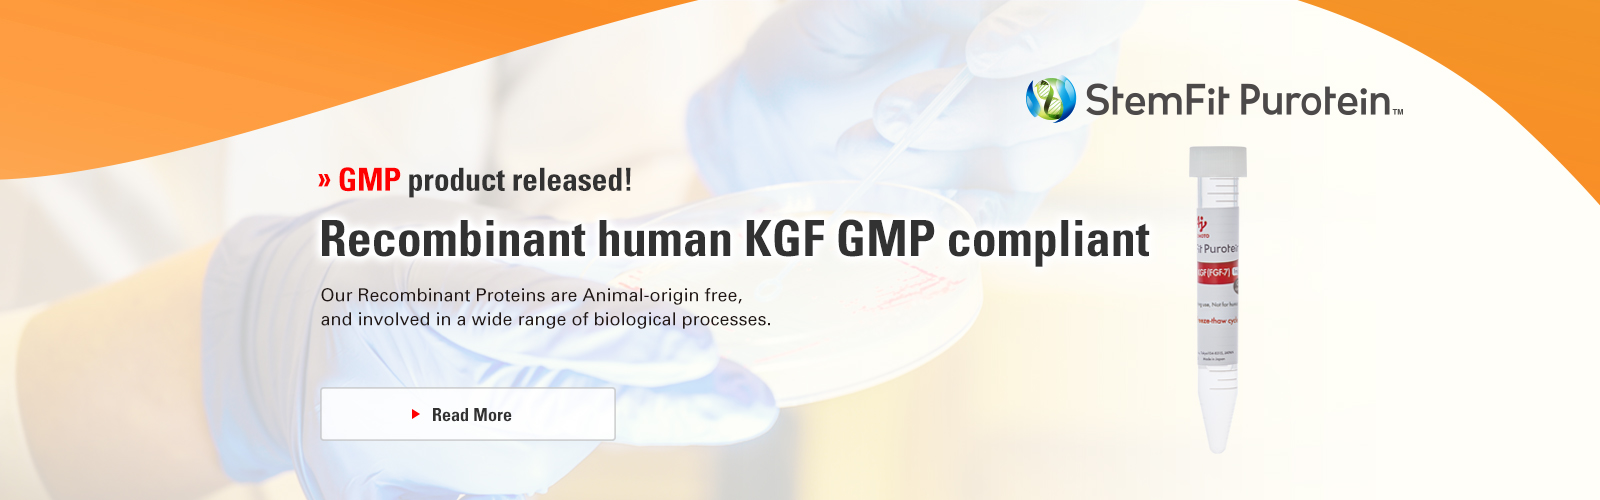 New product released! Recombinant human KGF Our Recombinant Proteins are Animal-origin free, and involved in a wide range of biological processes. Read More